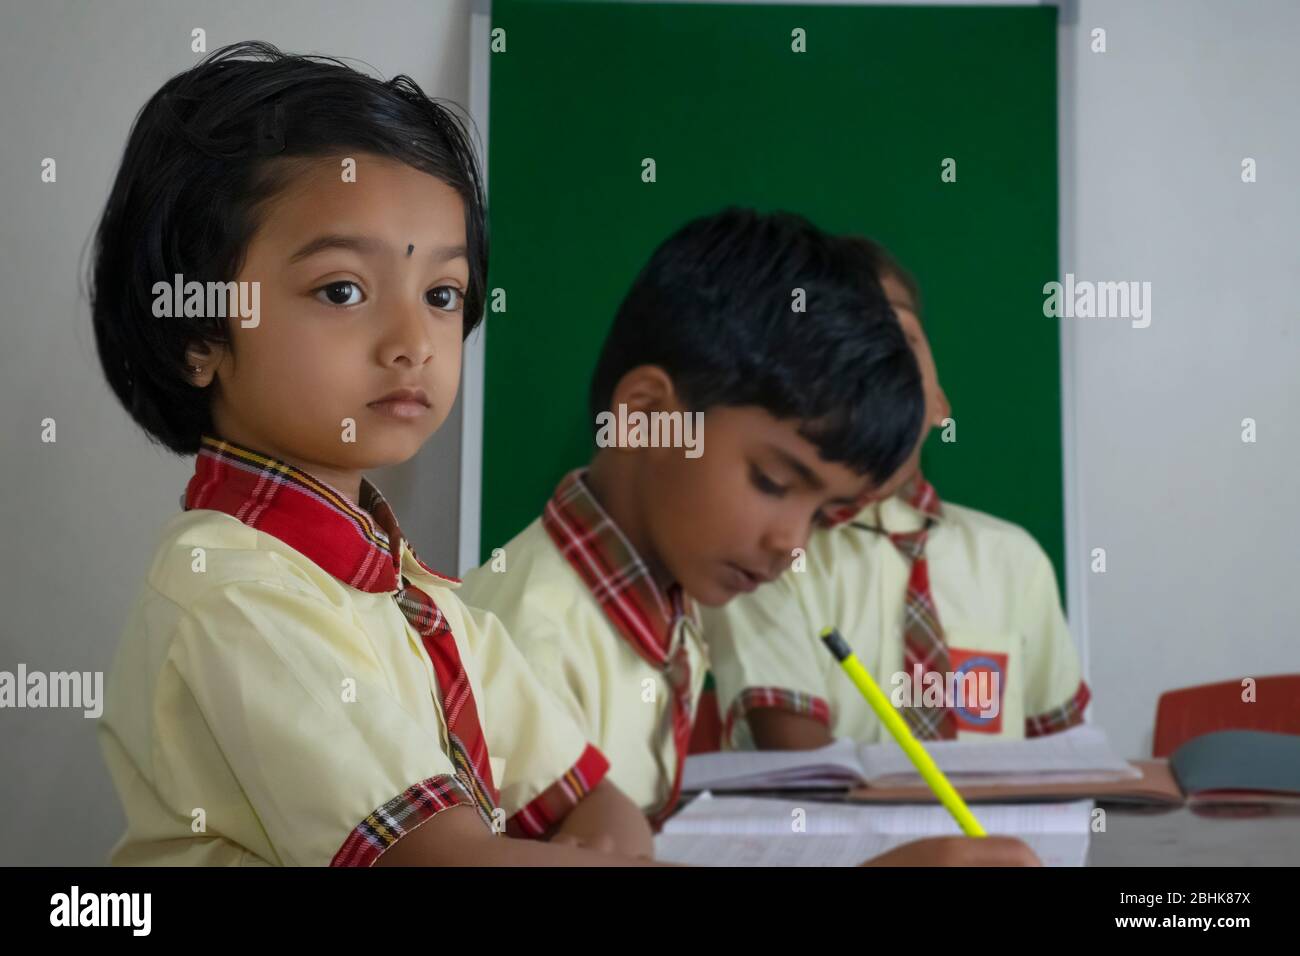 young school student studying in classroom Stock Photo